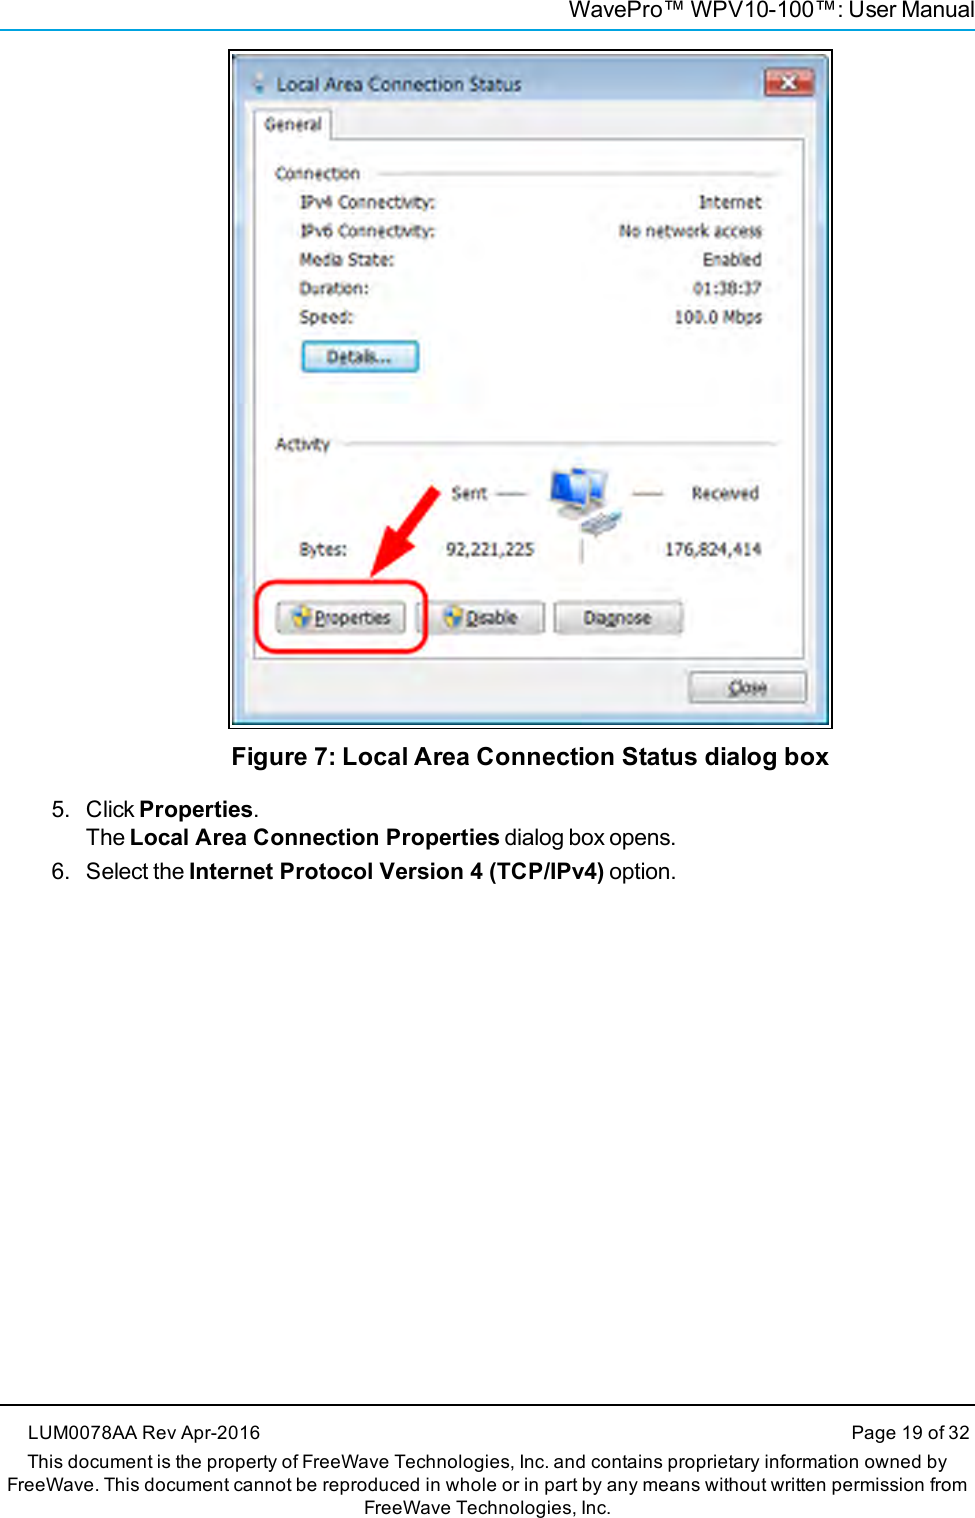 WavePro™ WPV10-100™: User ManualFigure 7: Local Area Connection Status dialog box5. Click Properties.The Local Area Connection Properties dialog box opens.6. Select the Internet Protocol Version 4 (TCP/IPv4) option.LUM0078AA Rev Apr-2016 Page 19 of 32This document is the property of FreeWave Technologies, Inc. and contains proprietary information owned byFreeWave. This document cannot be reproduced in whole or in part by any means without written permission fromFreeWave Technologies, Inc.